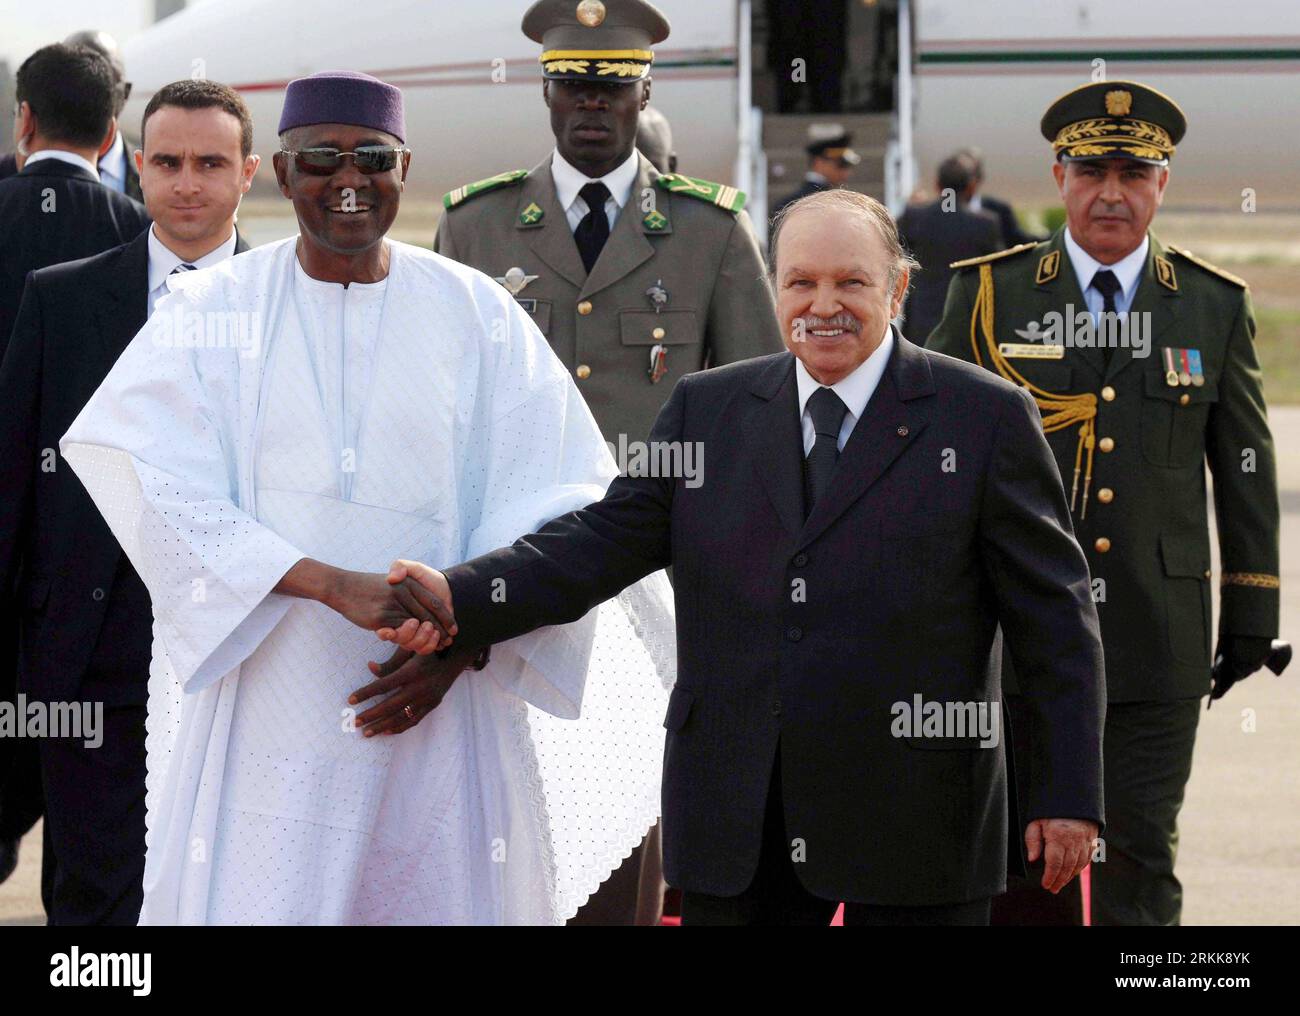 Bildnummer: 56212346  Datum: 24.10.2011  Copyright: imago/Xinhua (111024) -- ALGIERS, Oct. 24, 2011 (Xinhua) -- Malian President Amadou Toumani Toure (L, front) shakes hands with Algerian President Abdelaziz Bouteflika upon his arrival at Algiers, capital of Algeria, on Oct. 24, 2011. Amadou Toumani Toure started on Monday a four-day official visit to Algeria, leading a large delegation, to give new impetus to relations between Algeria and Mali and to lay the foundations for a more effective bilateral and regional cooperation, likely to face the terrorist threat in the Sahel region. (Xinhua/Mo Stock Photo